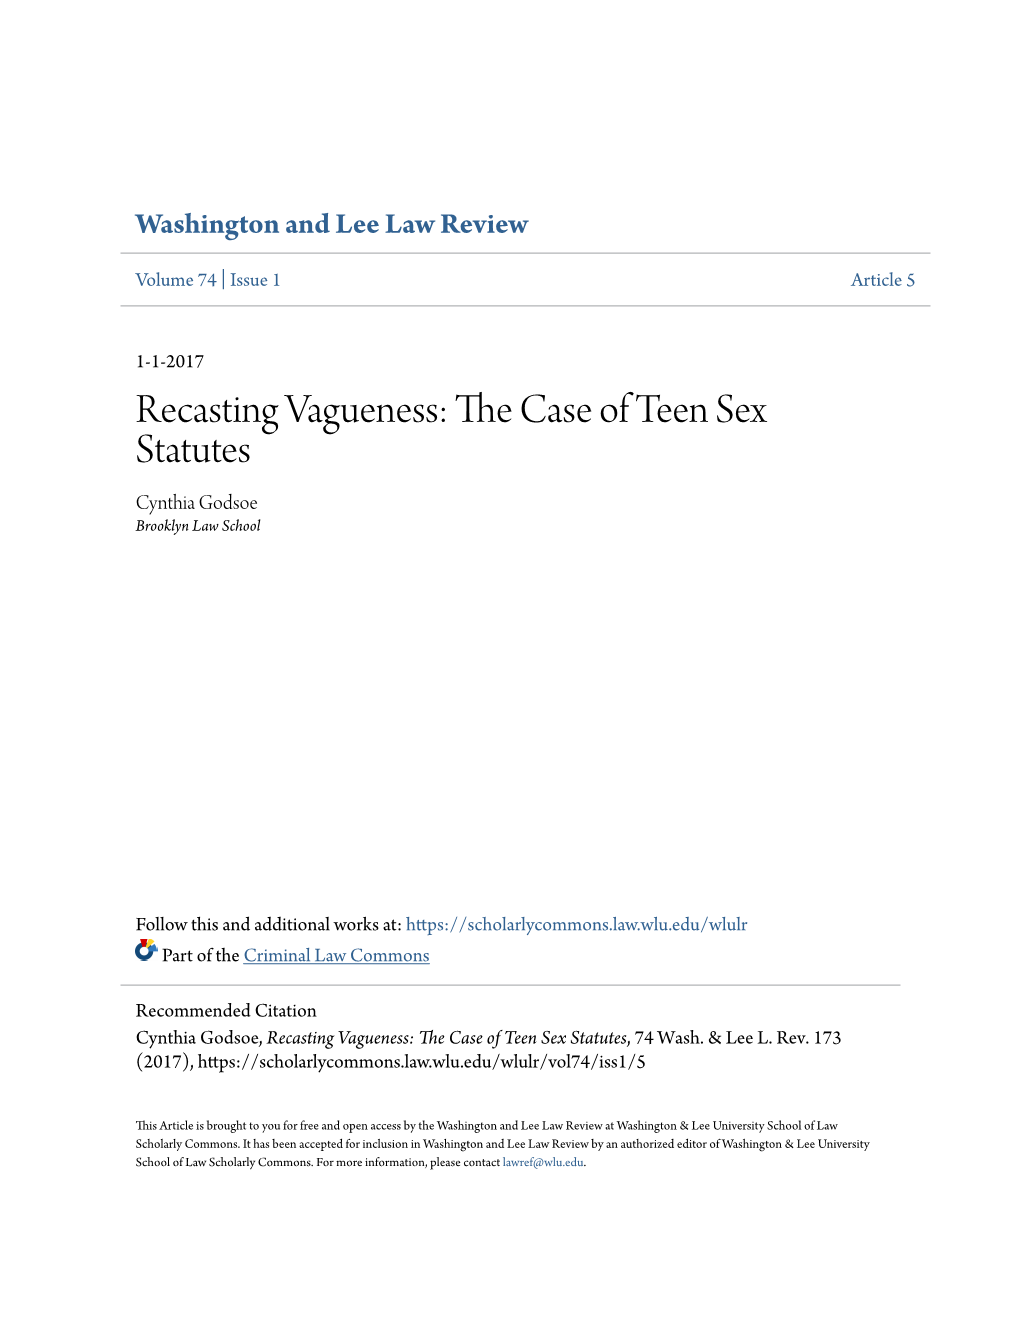 The Case of Teen Sex Statutes, 74 Wash